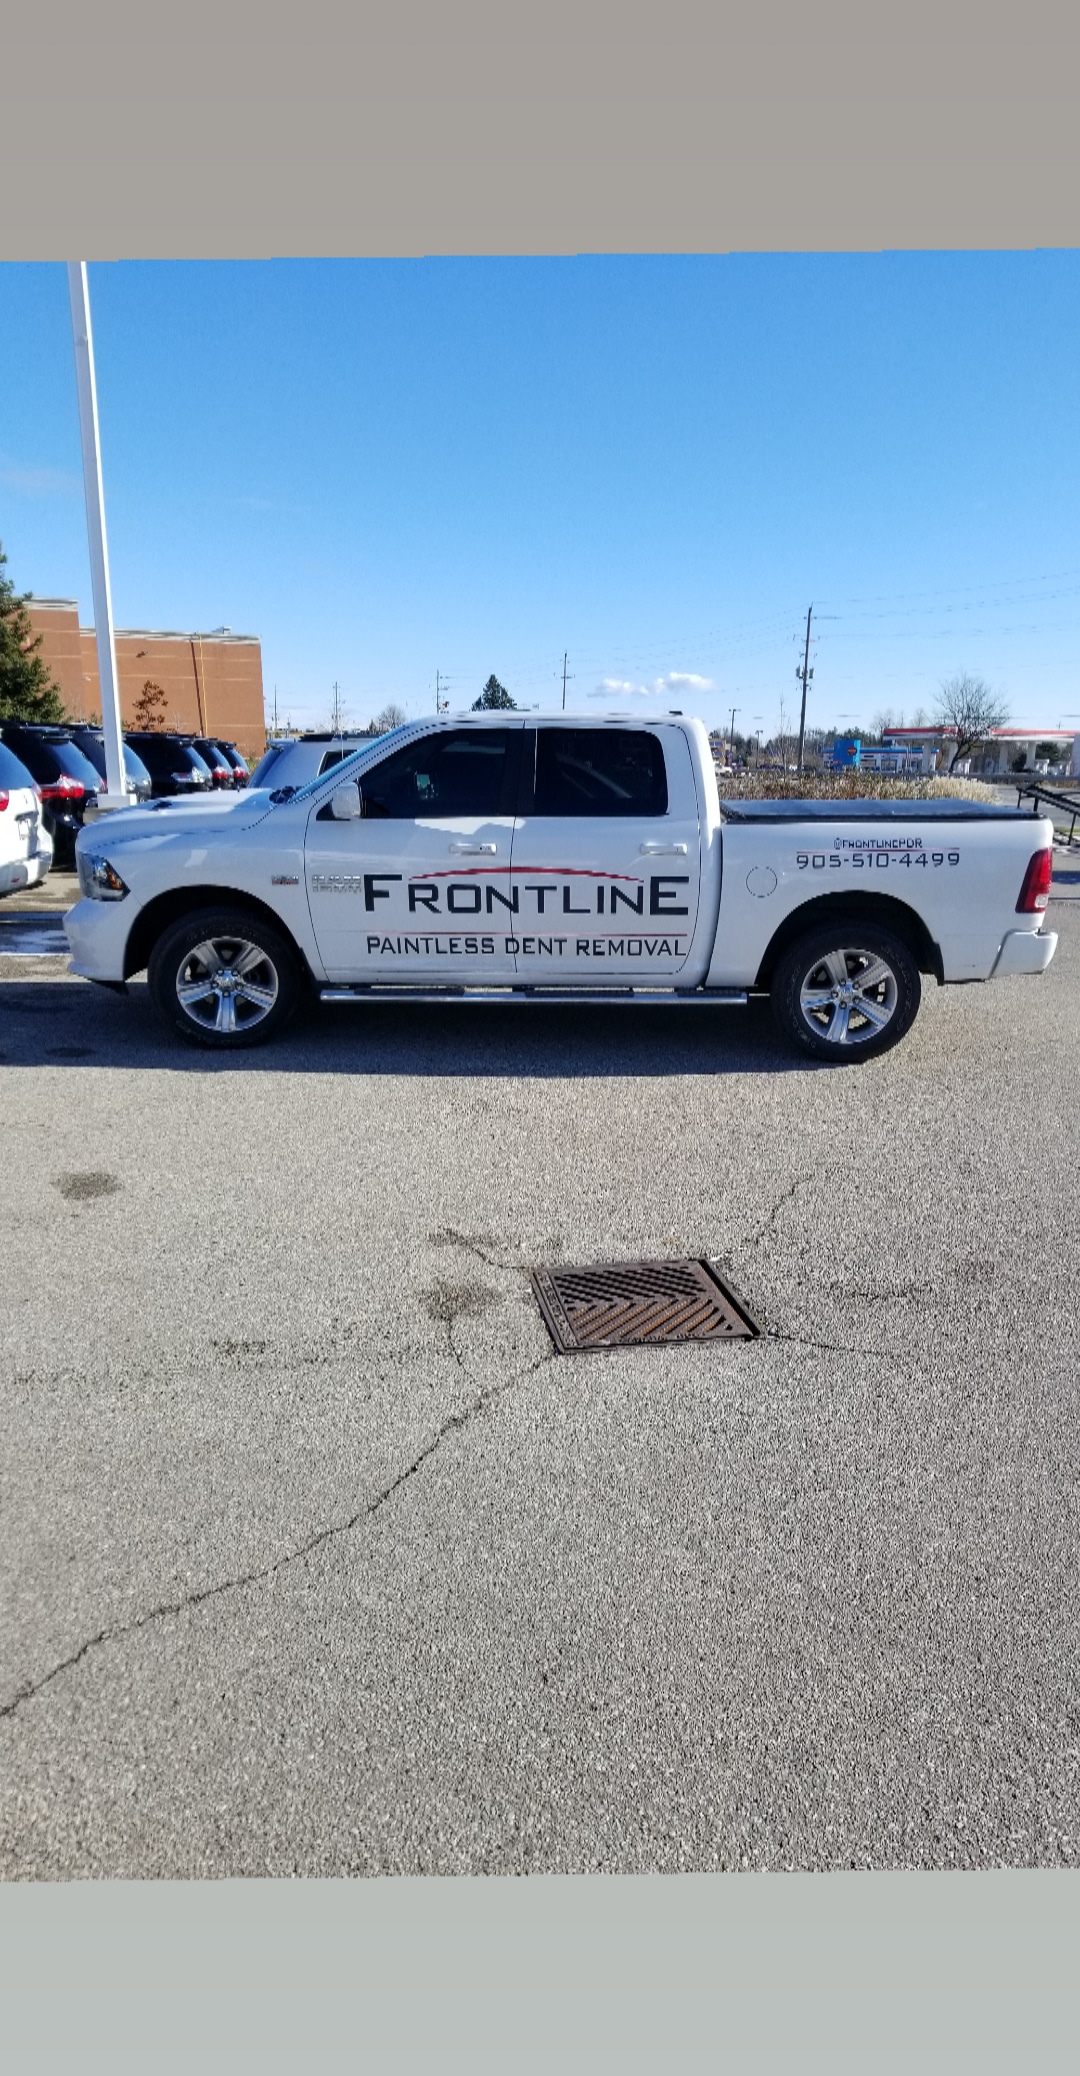 Frontline Paintless Dent Removal